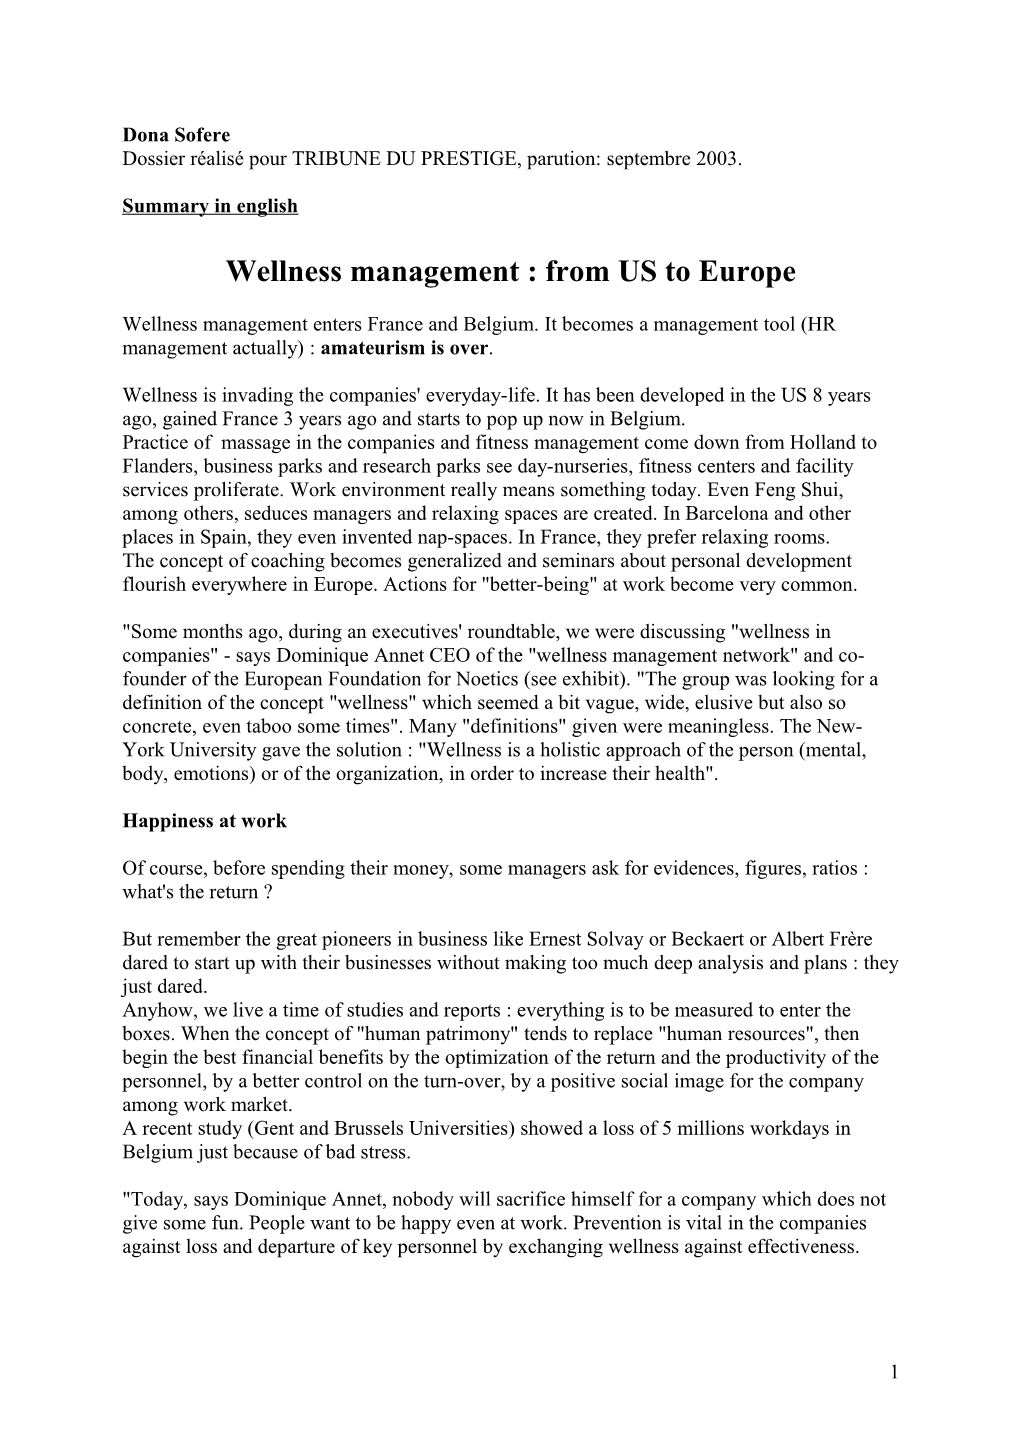 Wellness Management : from US to Europe